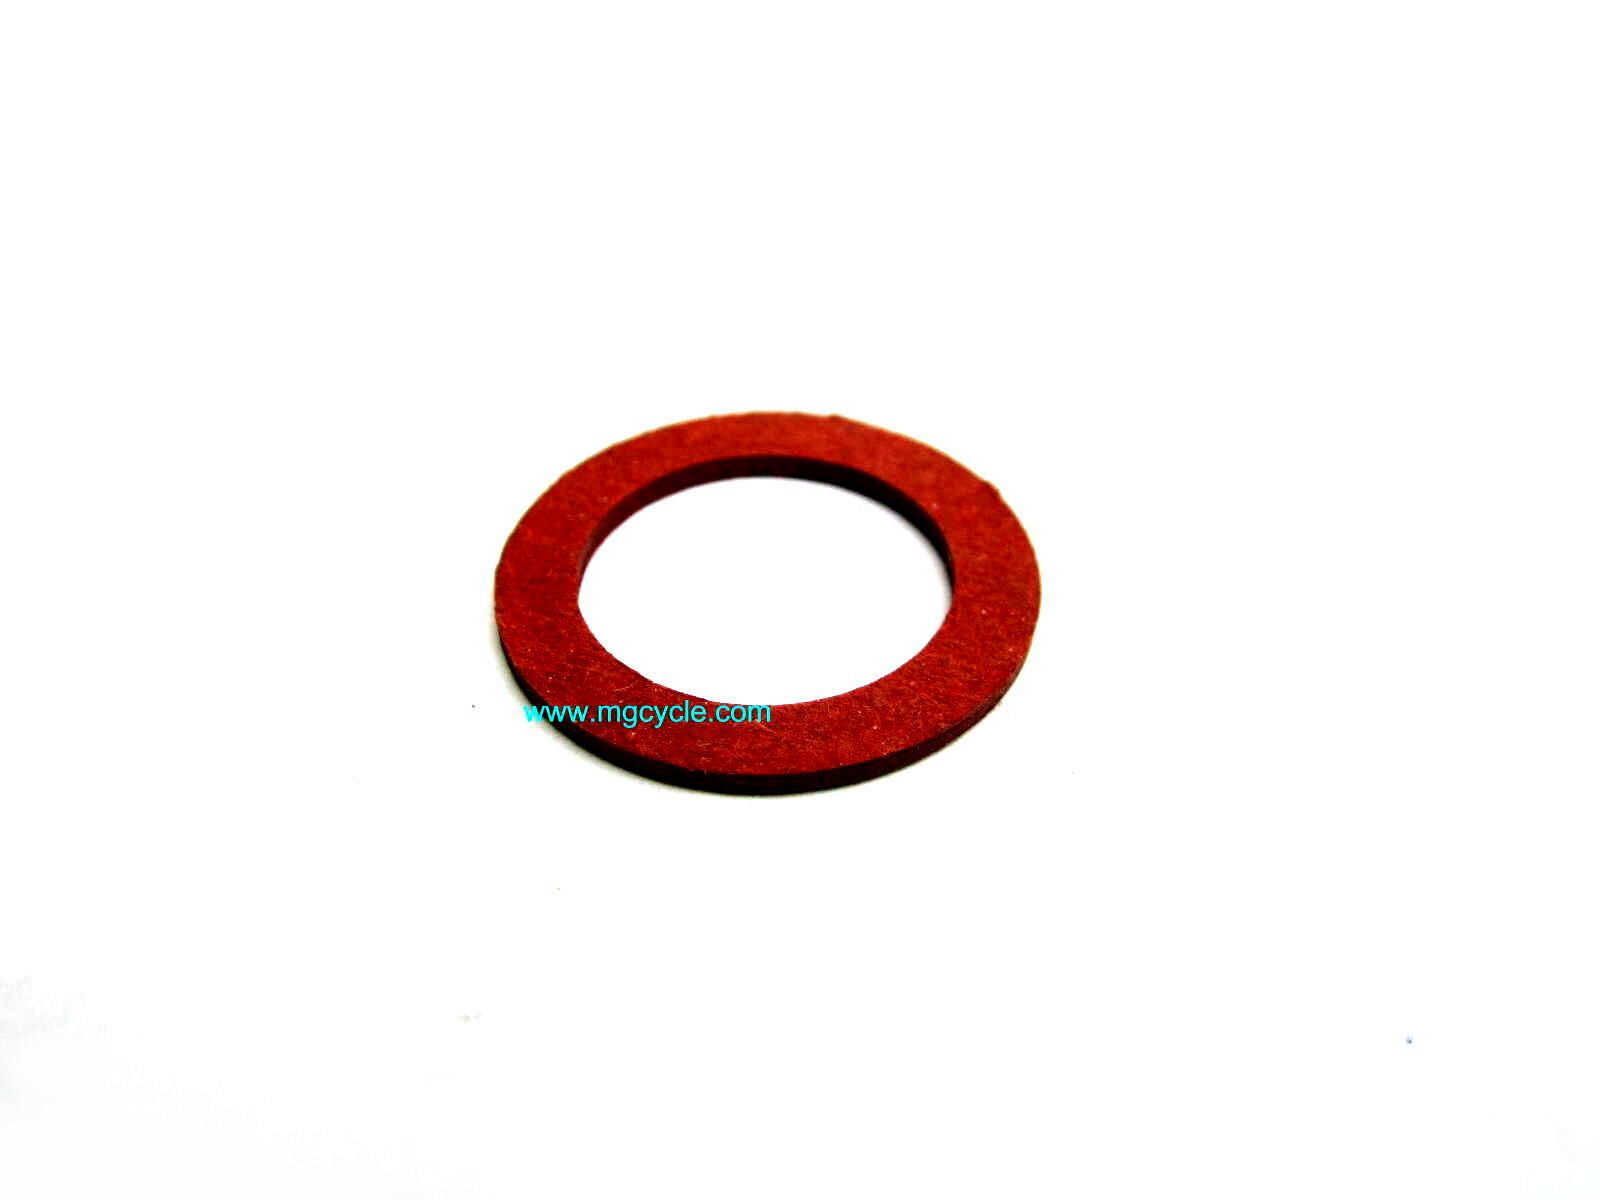 20mm fiber washer for fill, drain plugs PHM/PHF bowl nut gasket